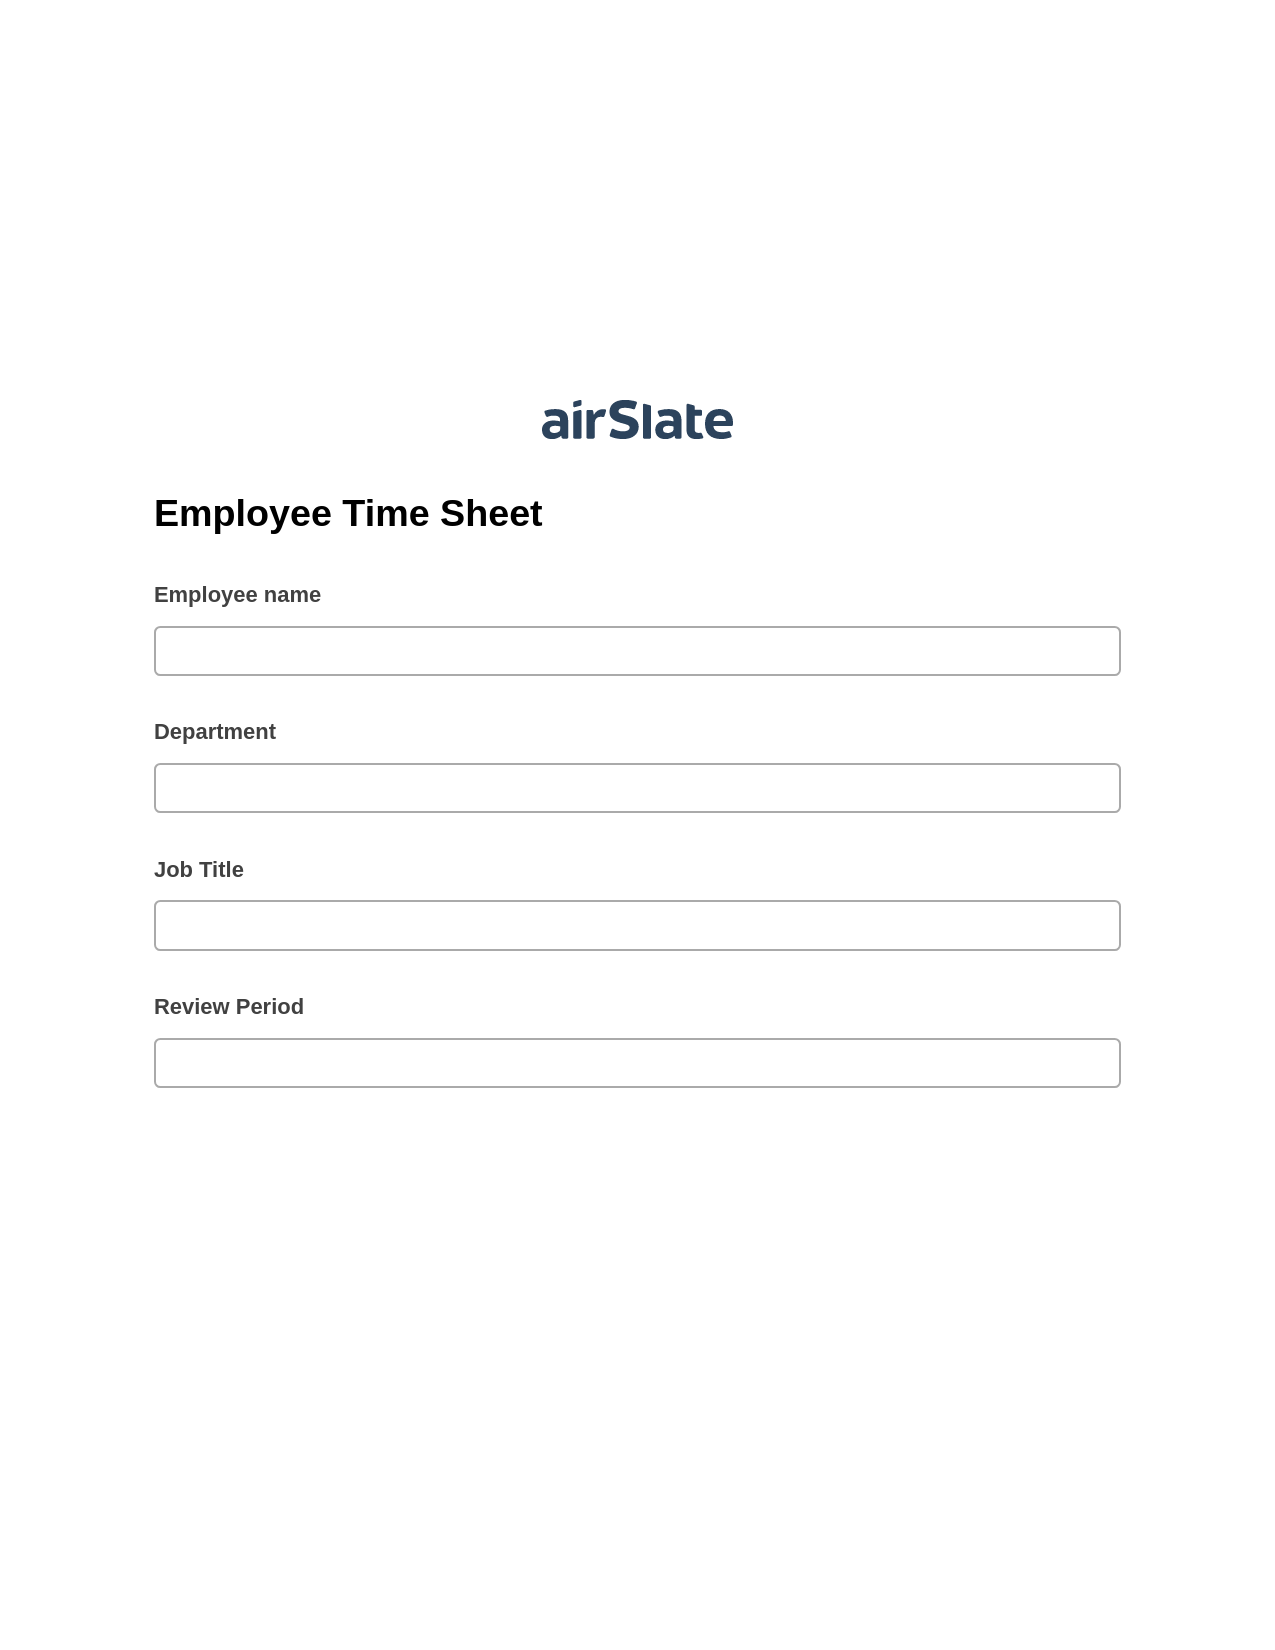 Multirole Employee Time Sheet Pre-fill Document Bot, Send a Slate to Salesforce Contact Bot, Export to WebMerge Bot